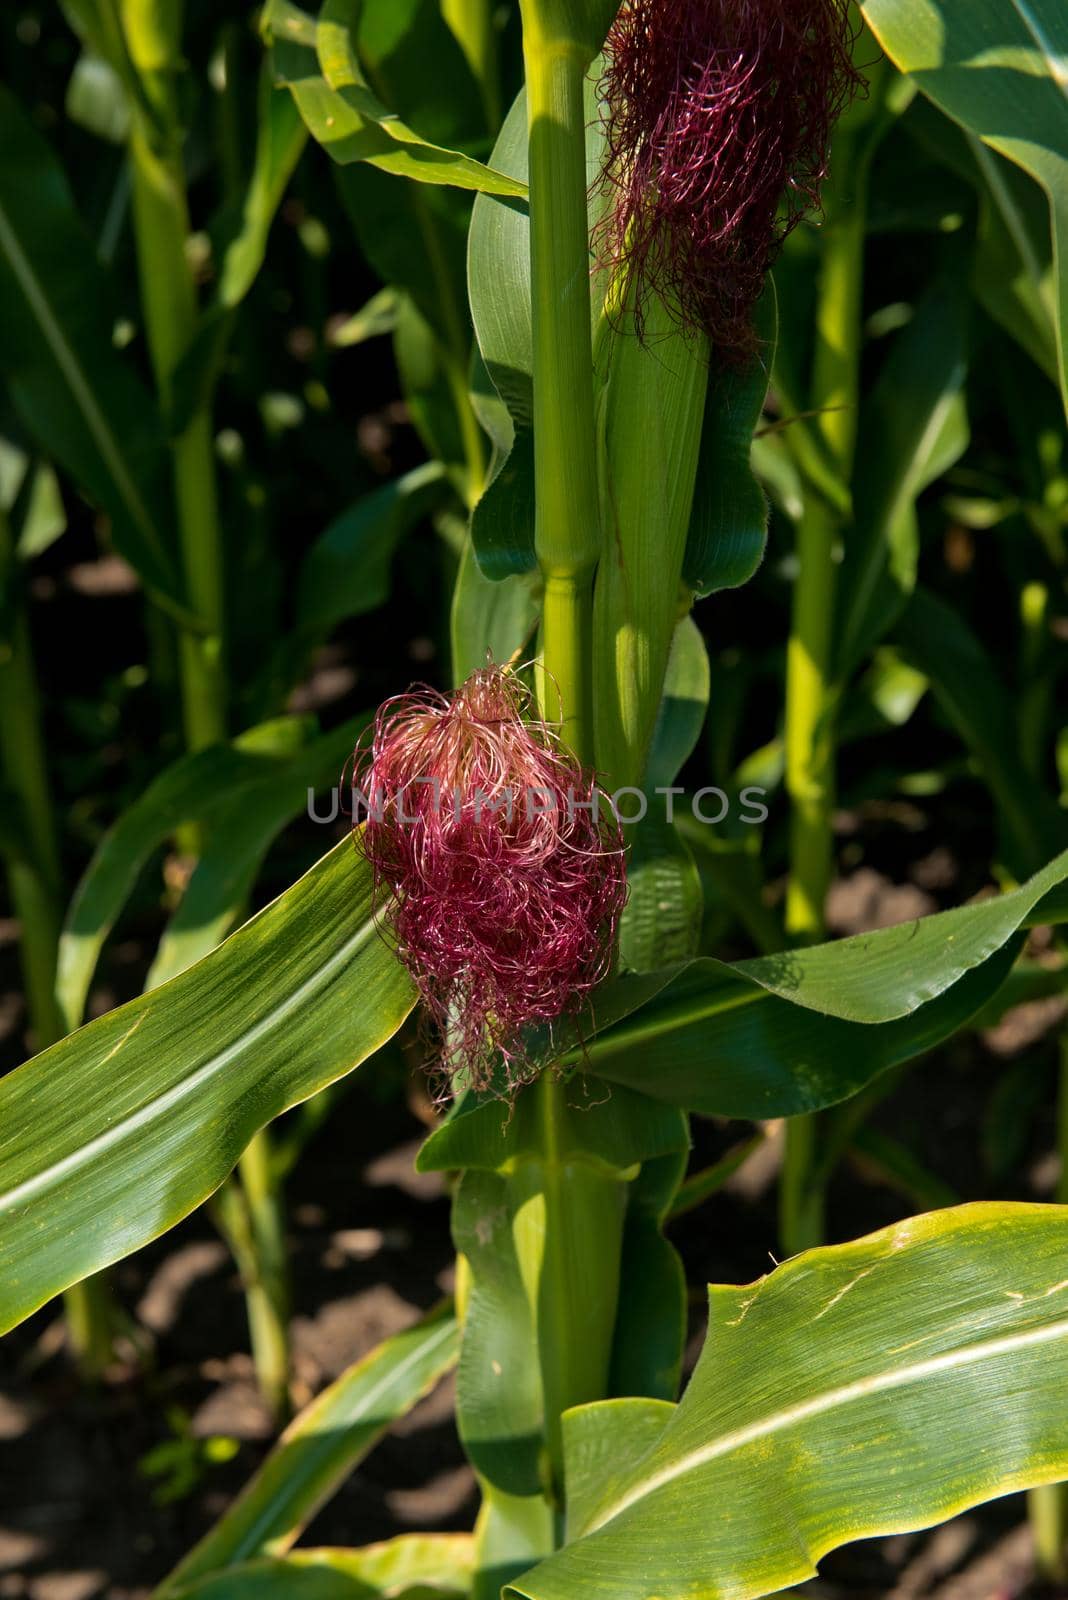 Close-up of fresh small corn cob with hairs on the tip.